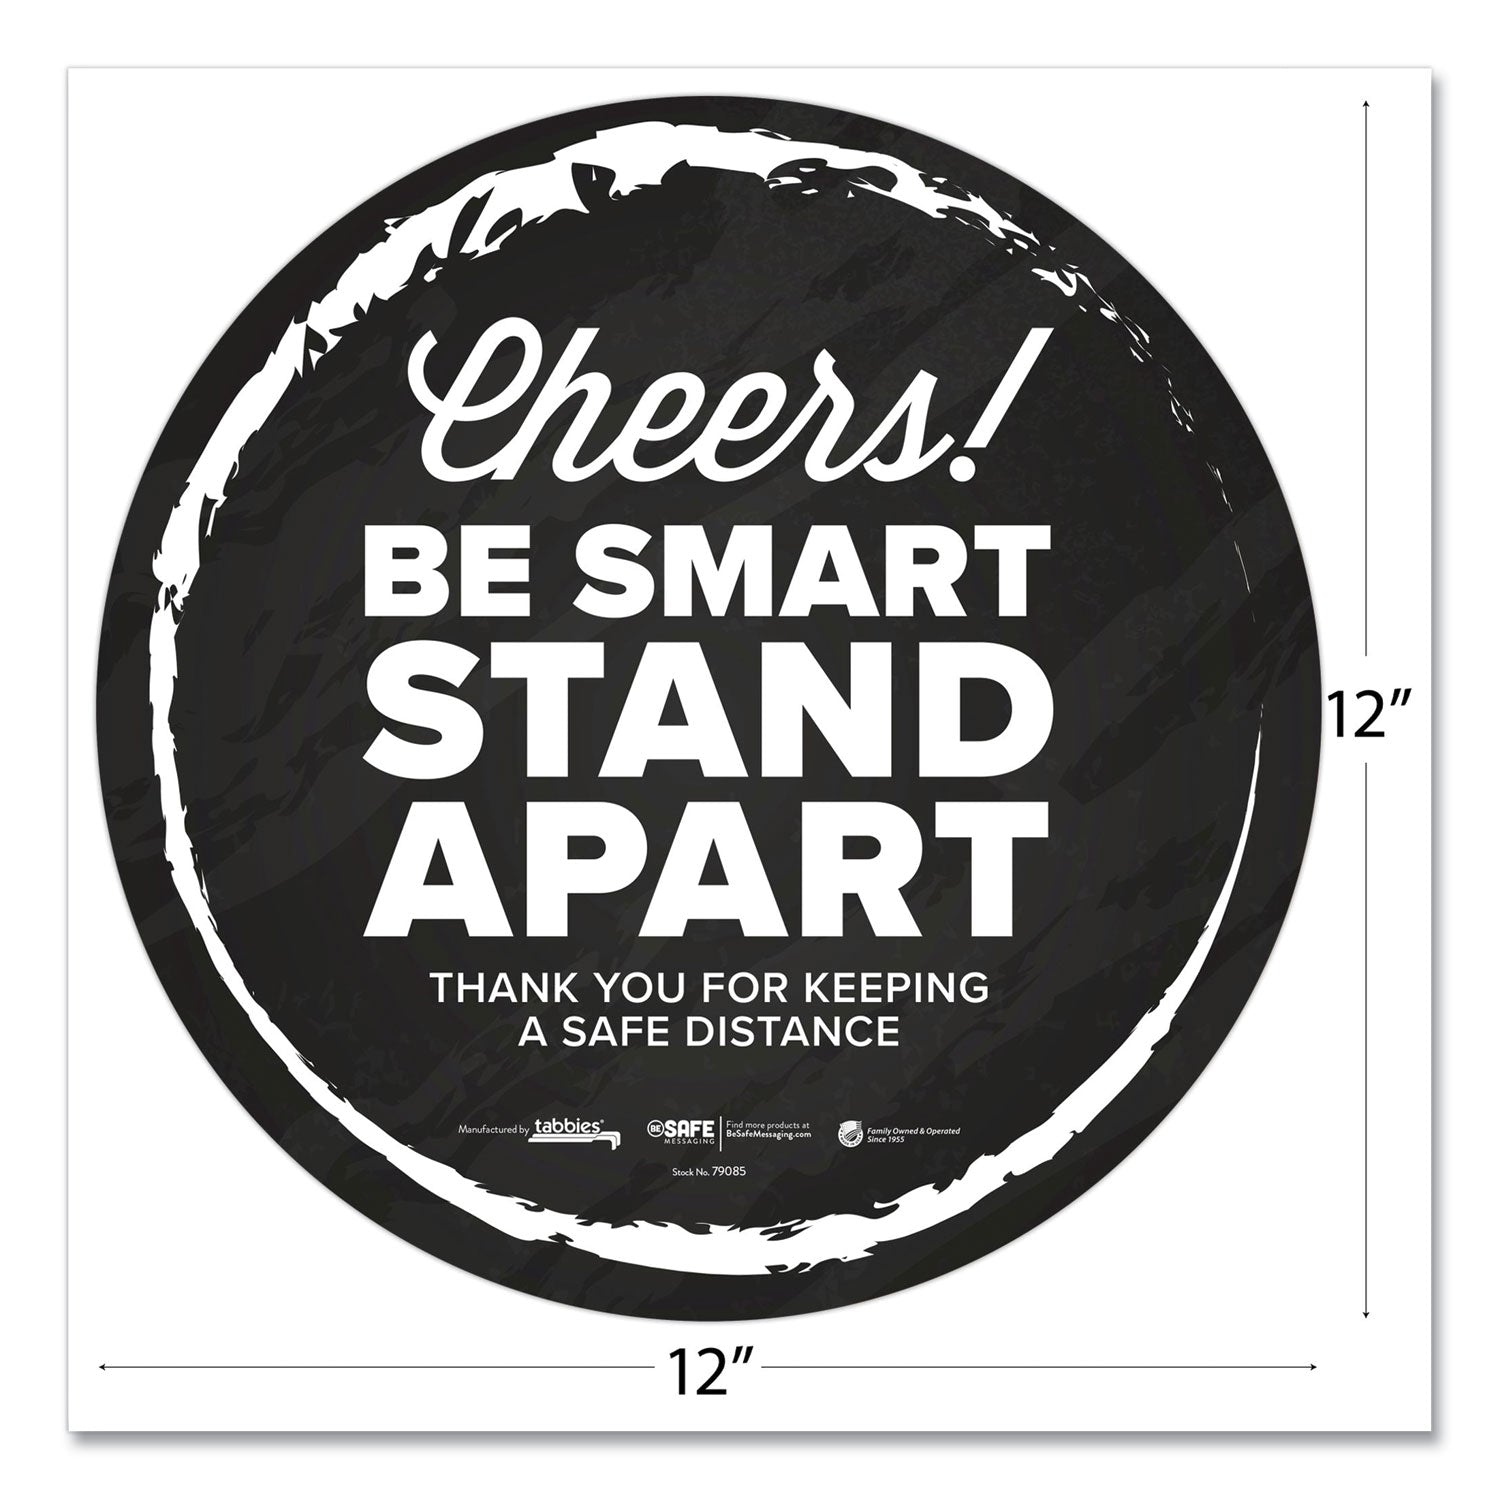 besafe-messaging-floor-decals-cheers;be-smart-stand-apart;thank-you-for-keeping-a-safe-distance-12-dia-black-white-6-ct_tab79085 - 2